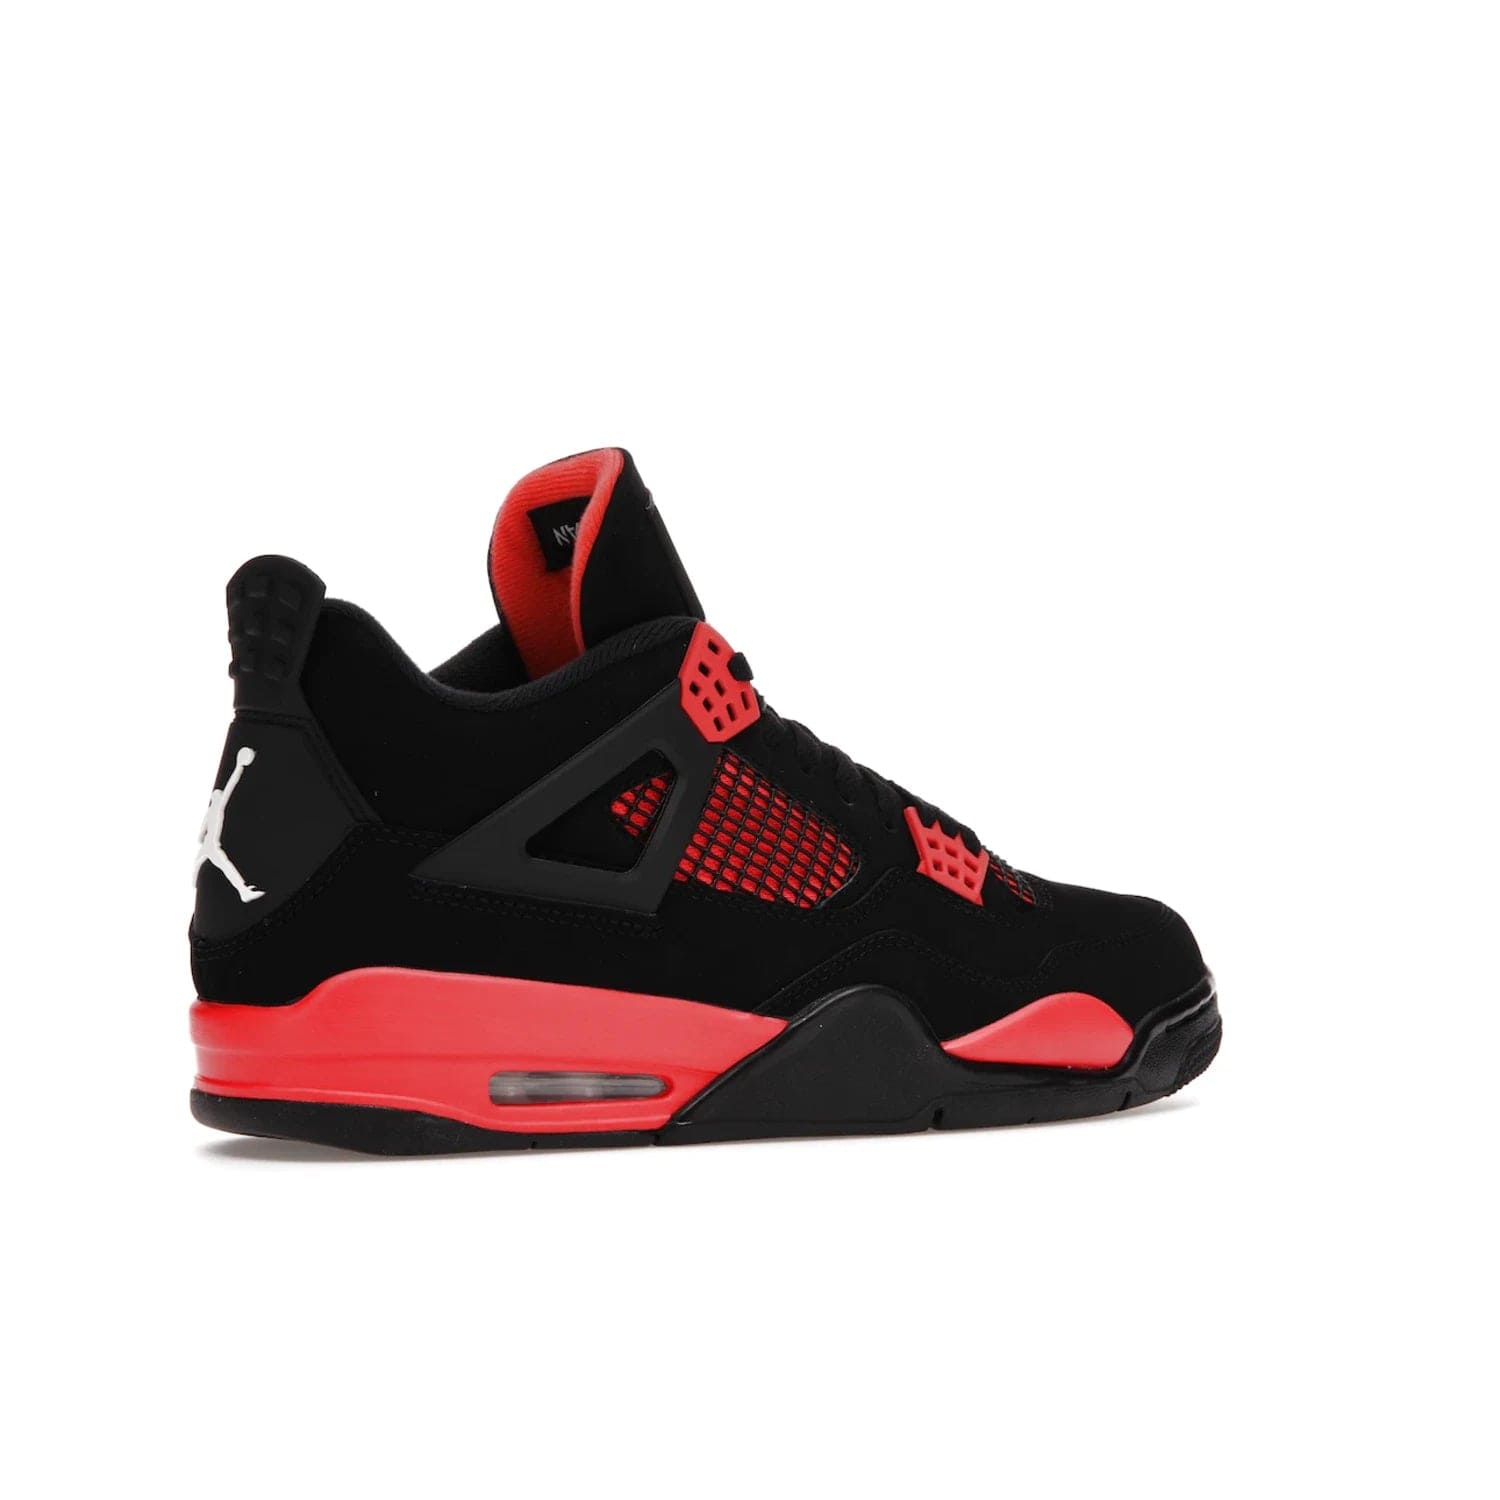 Jordan 4 Retro Red Thunder - Image 34 - Only at www.BallersClubKickz.com - Upscale your footwear with the Air Jordan 4 Retro Red Thunder. Featuring a Durabuck upper, red underlays, signature Flight patch, and vibrant red midsole, this retro sneaker adds style and edge. Releases in January 2022.